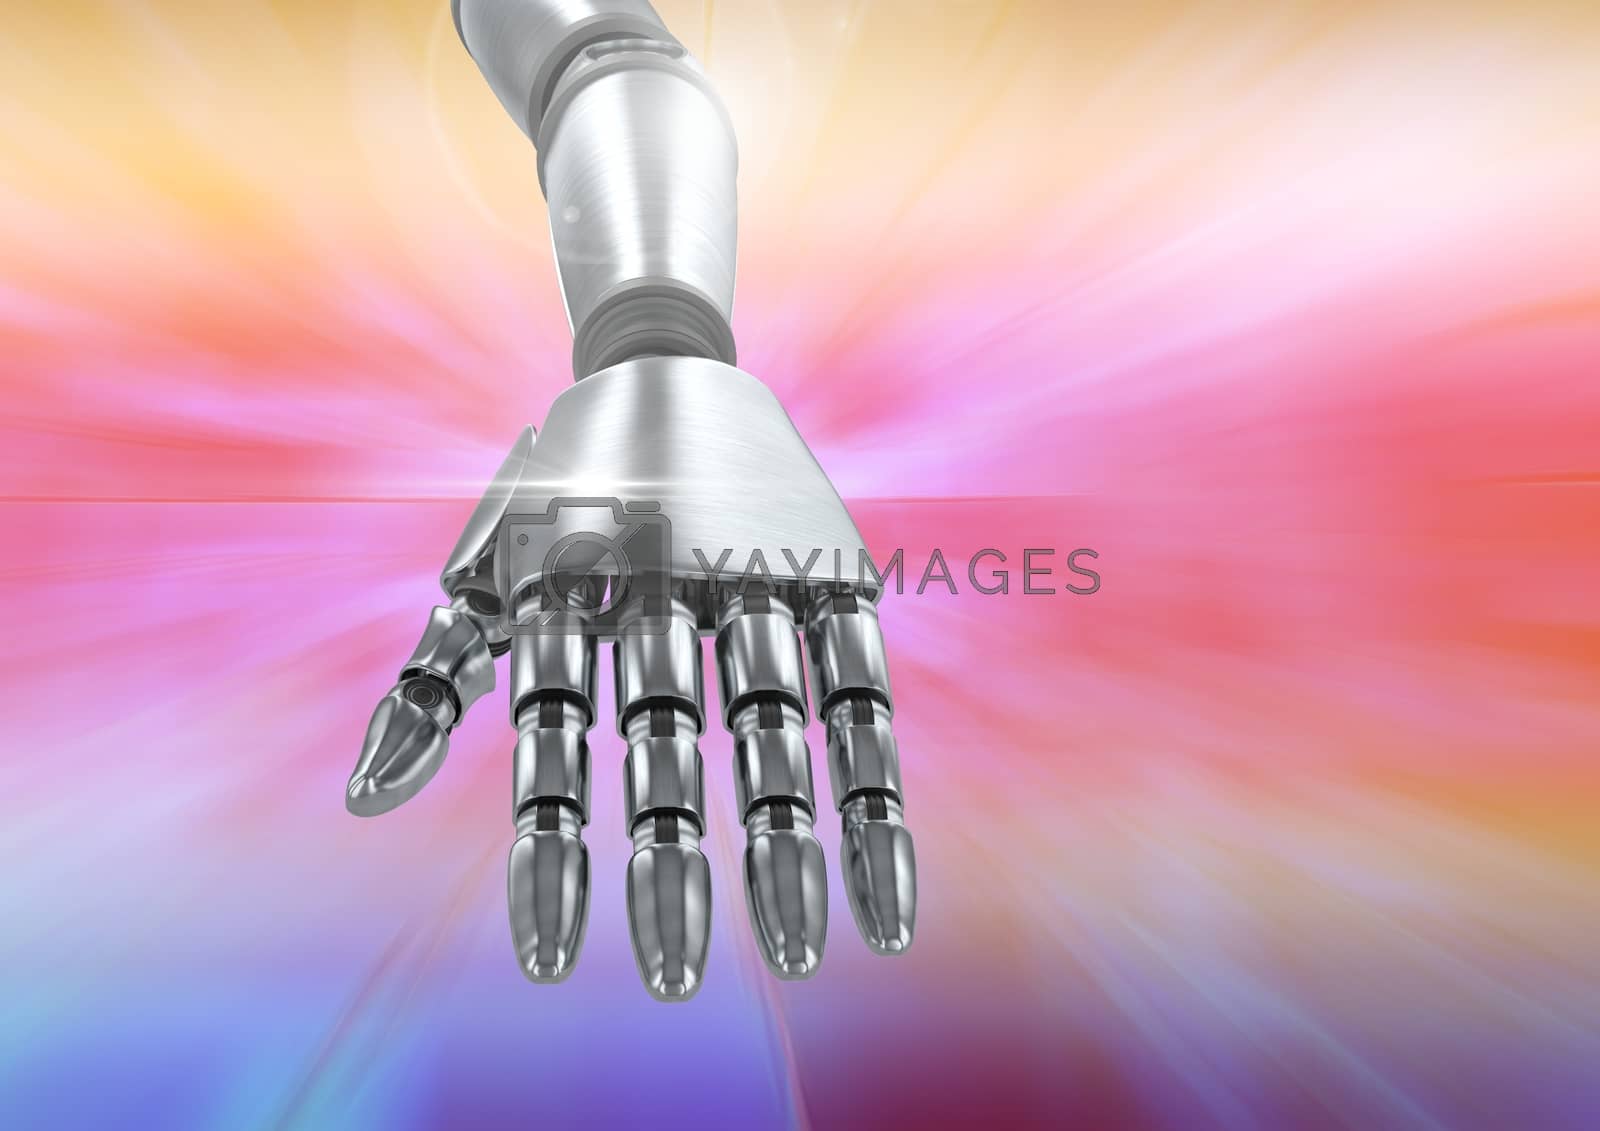 Royalty free image of Composite image of robotic hand against a colorful background by Wavebreakmedia